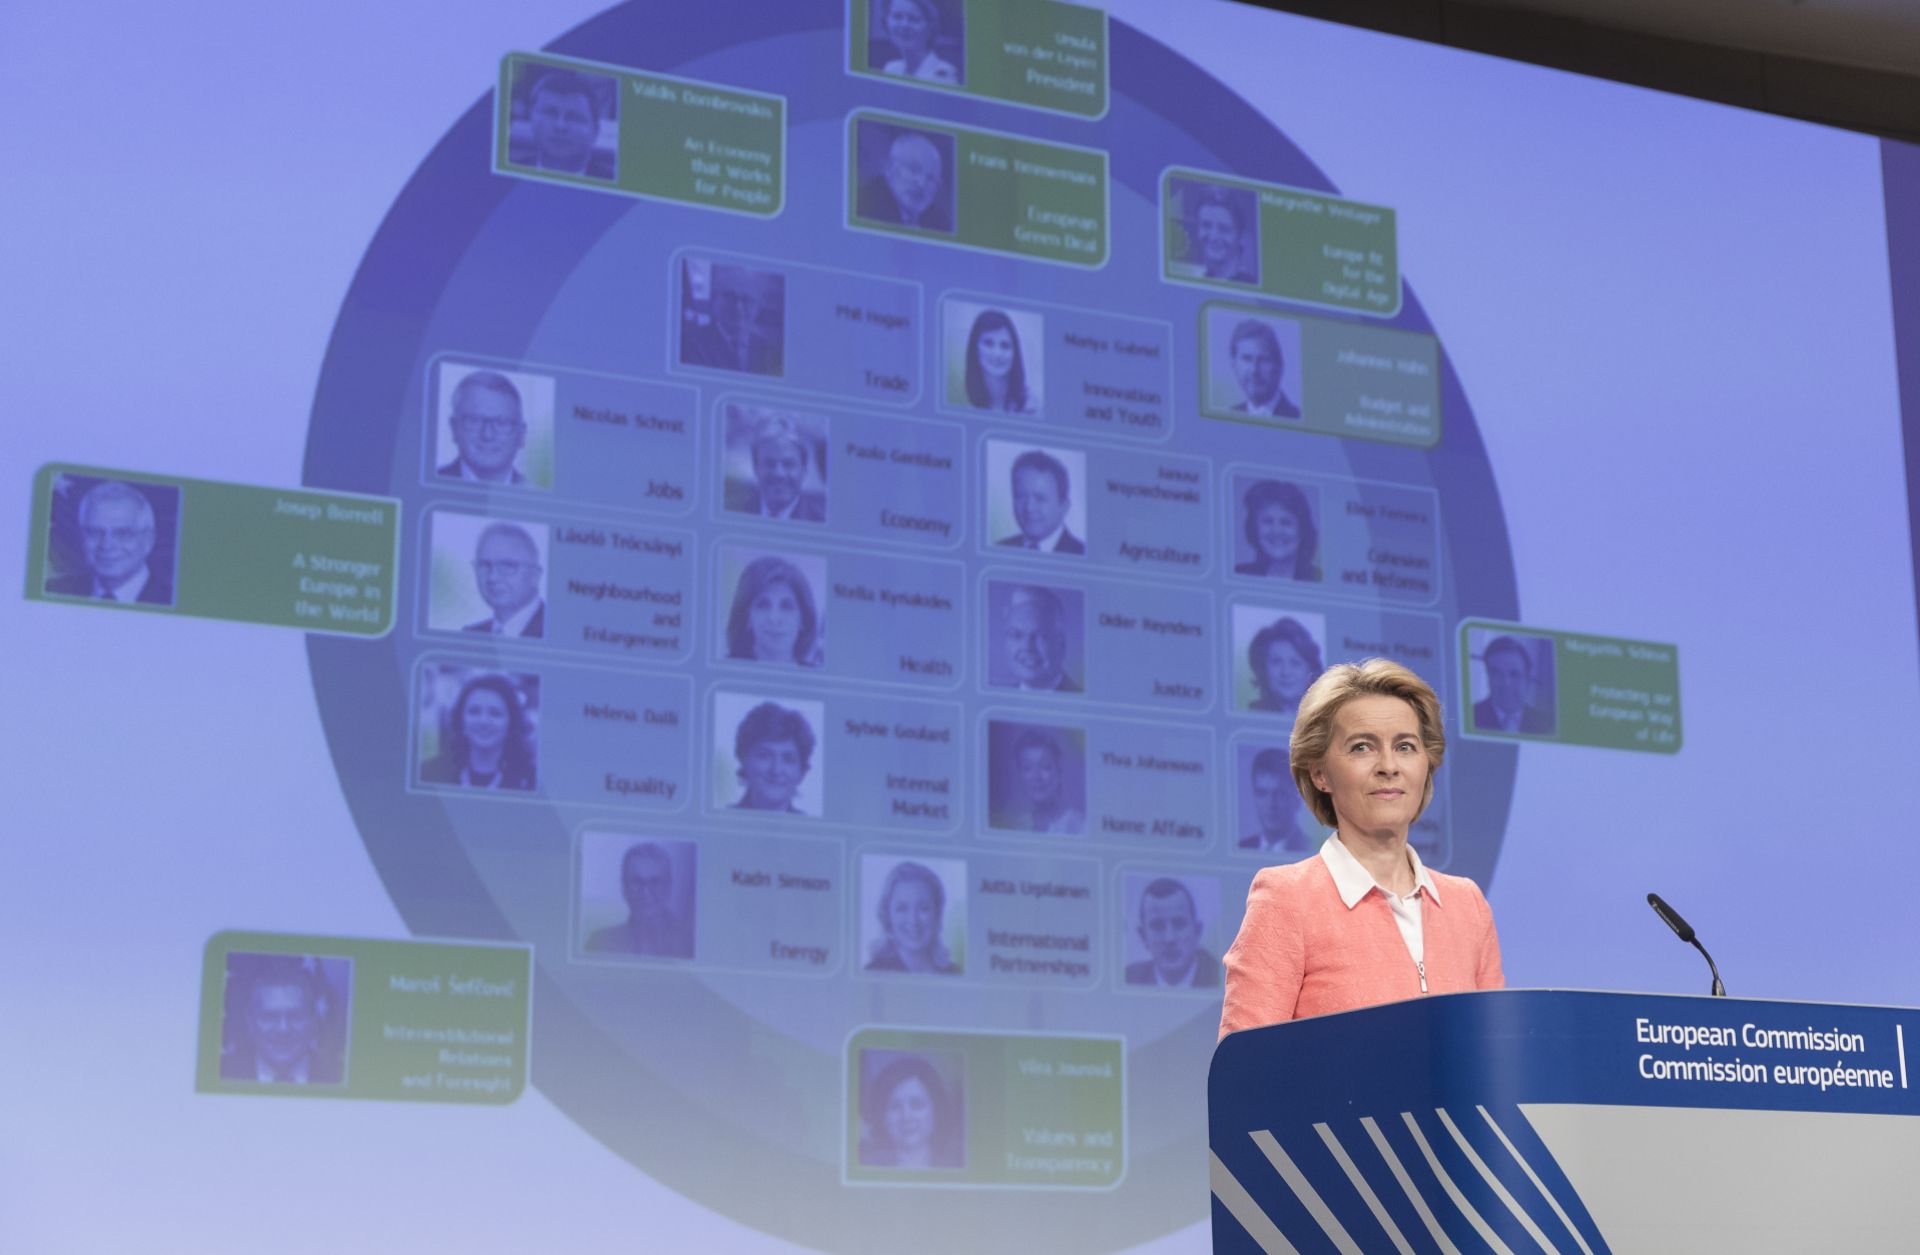 The European Commission's president-elect, Ursula von der Leyen, talks to the media during the unveiling of her new team for the 2019-2024 term. A graphic showing the specific commissioners is displayed on a large screen behind her. 